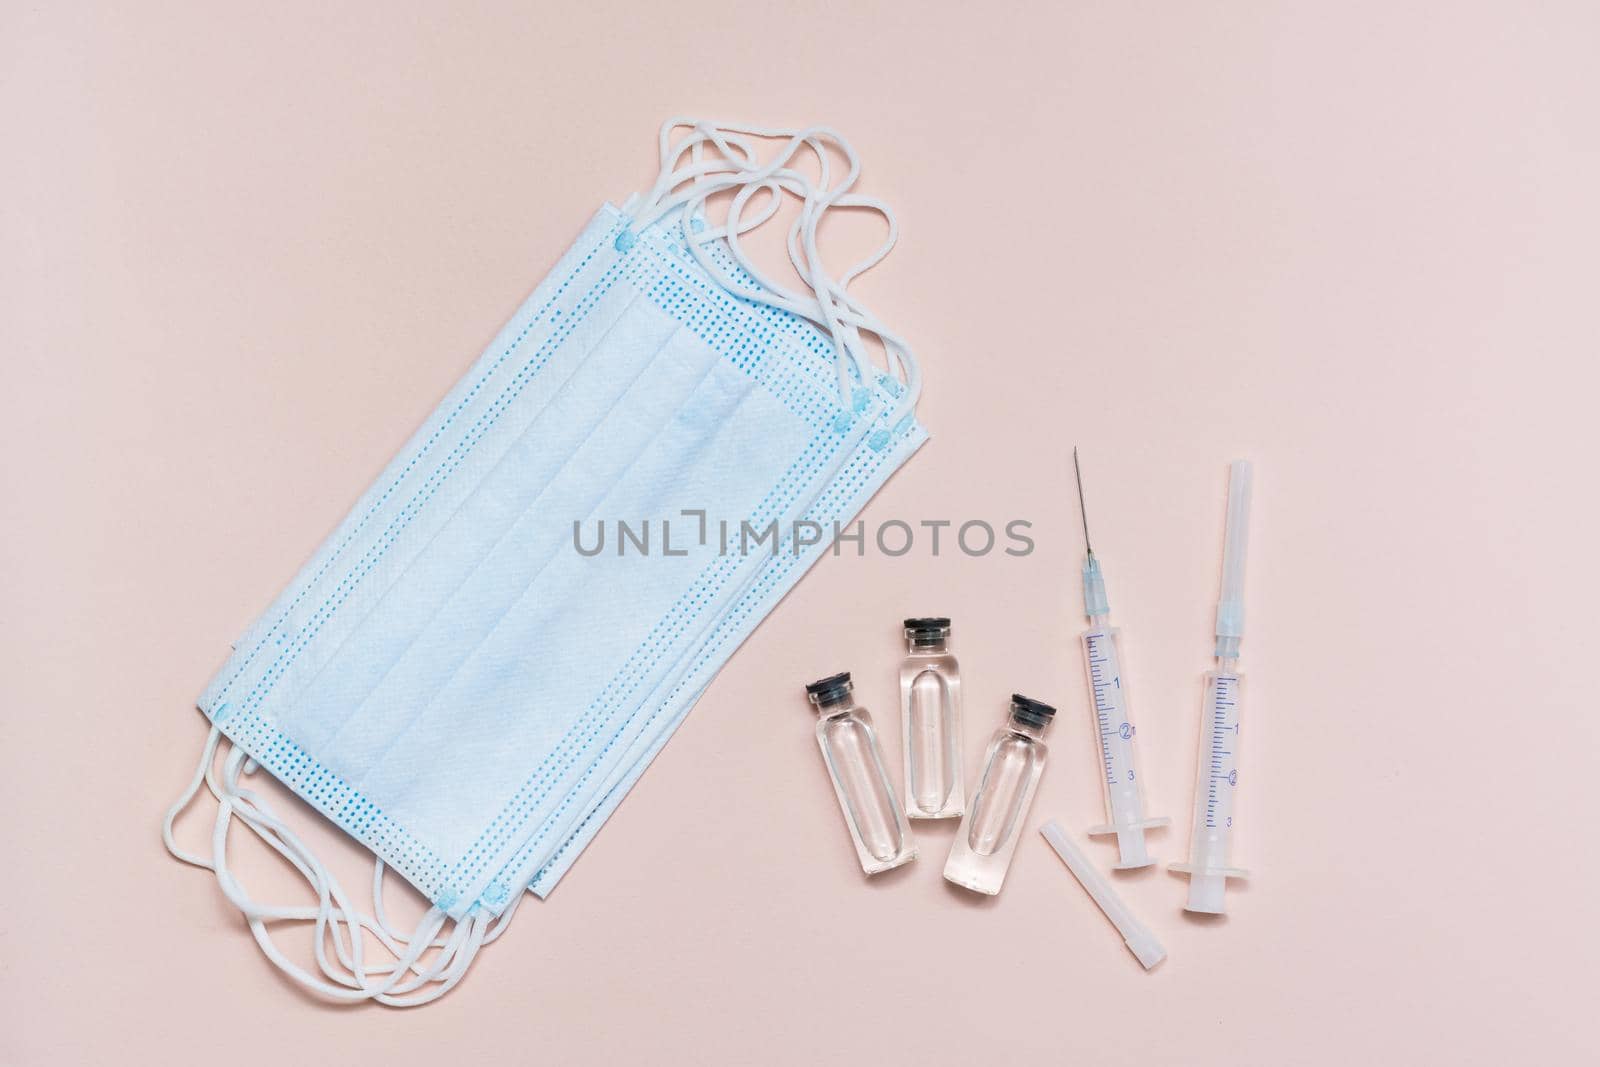 Vaccination and Immunization. Clean syringes, glass vial with vaccine and face protective masks. Top view. Close-up by Aleruana